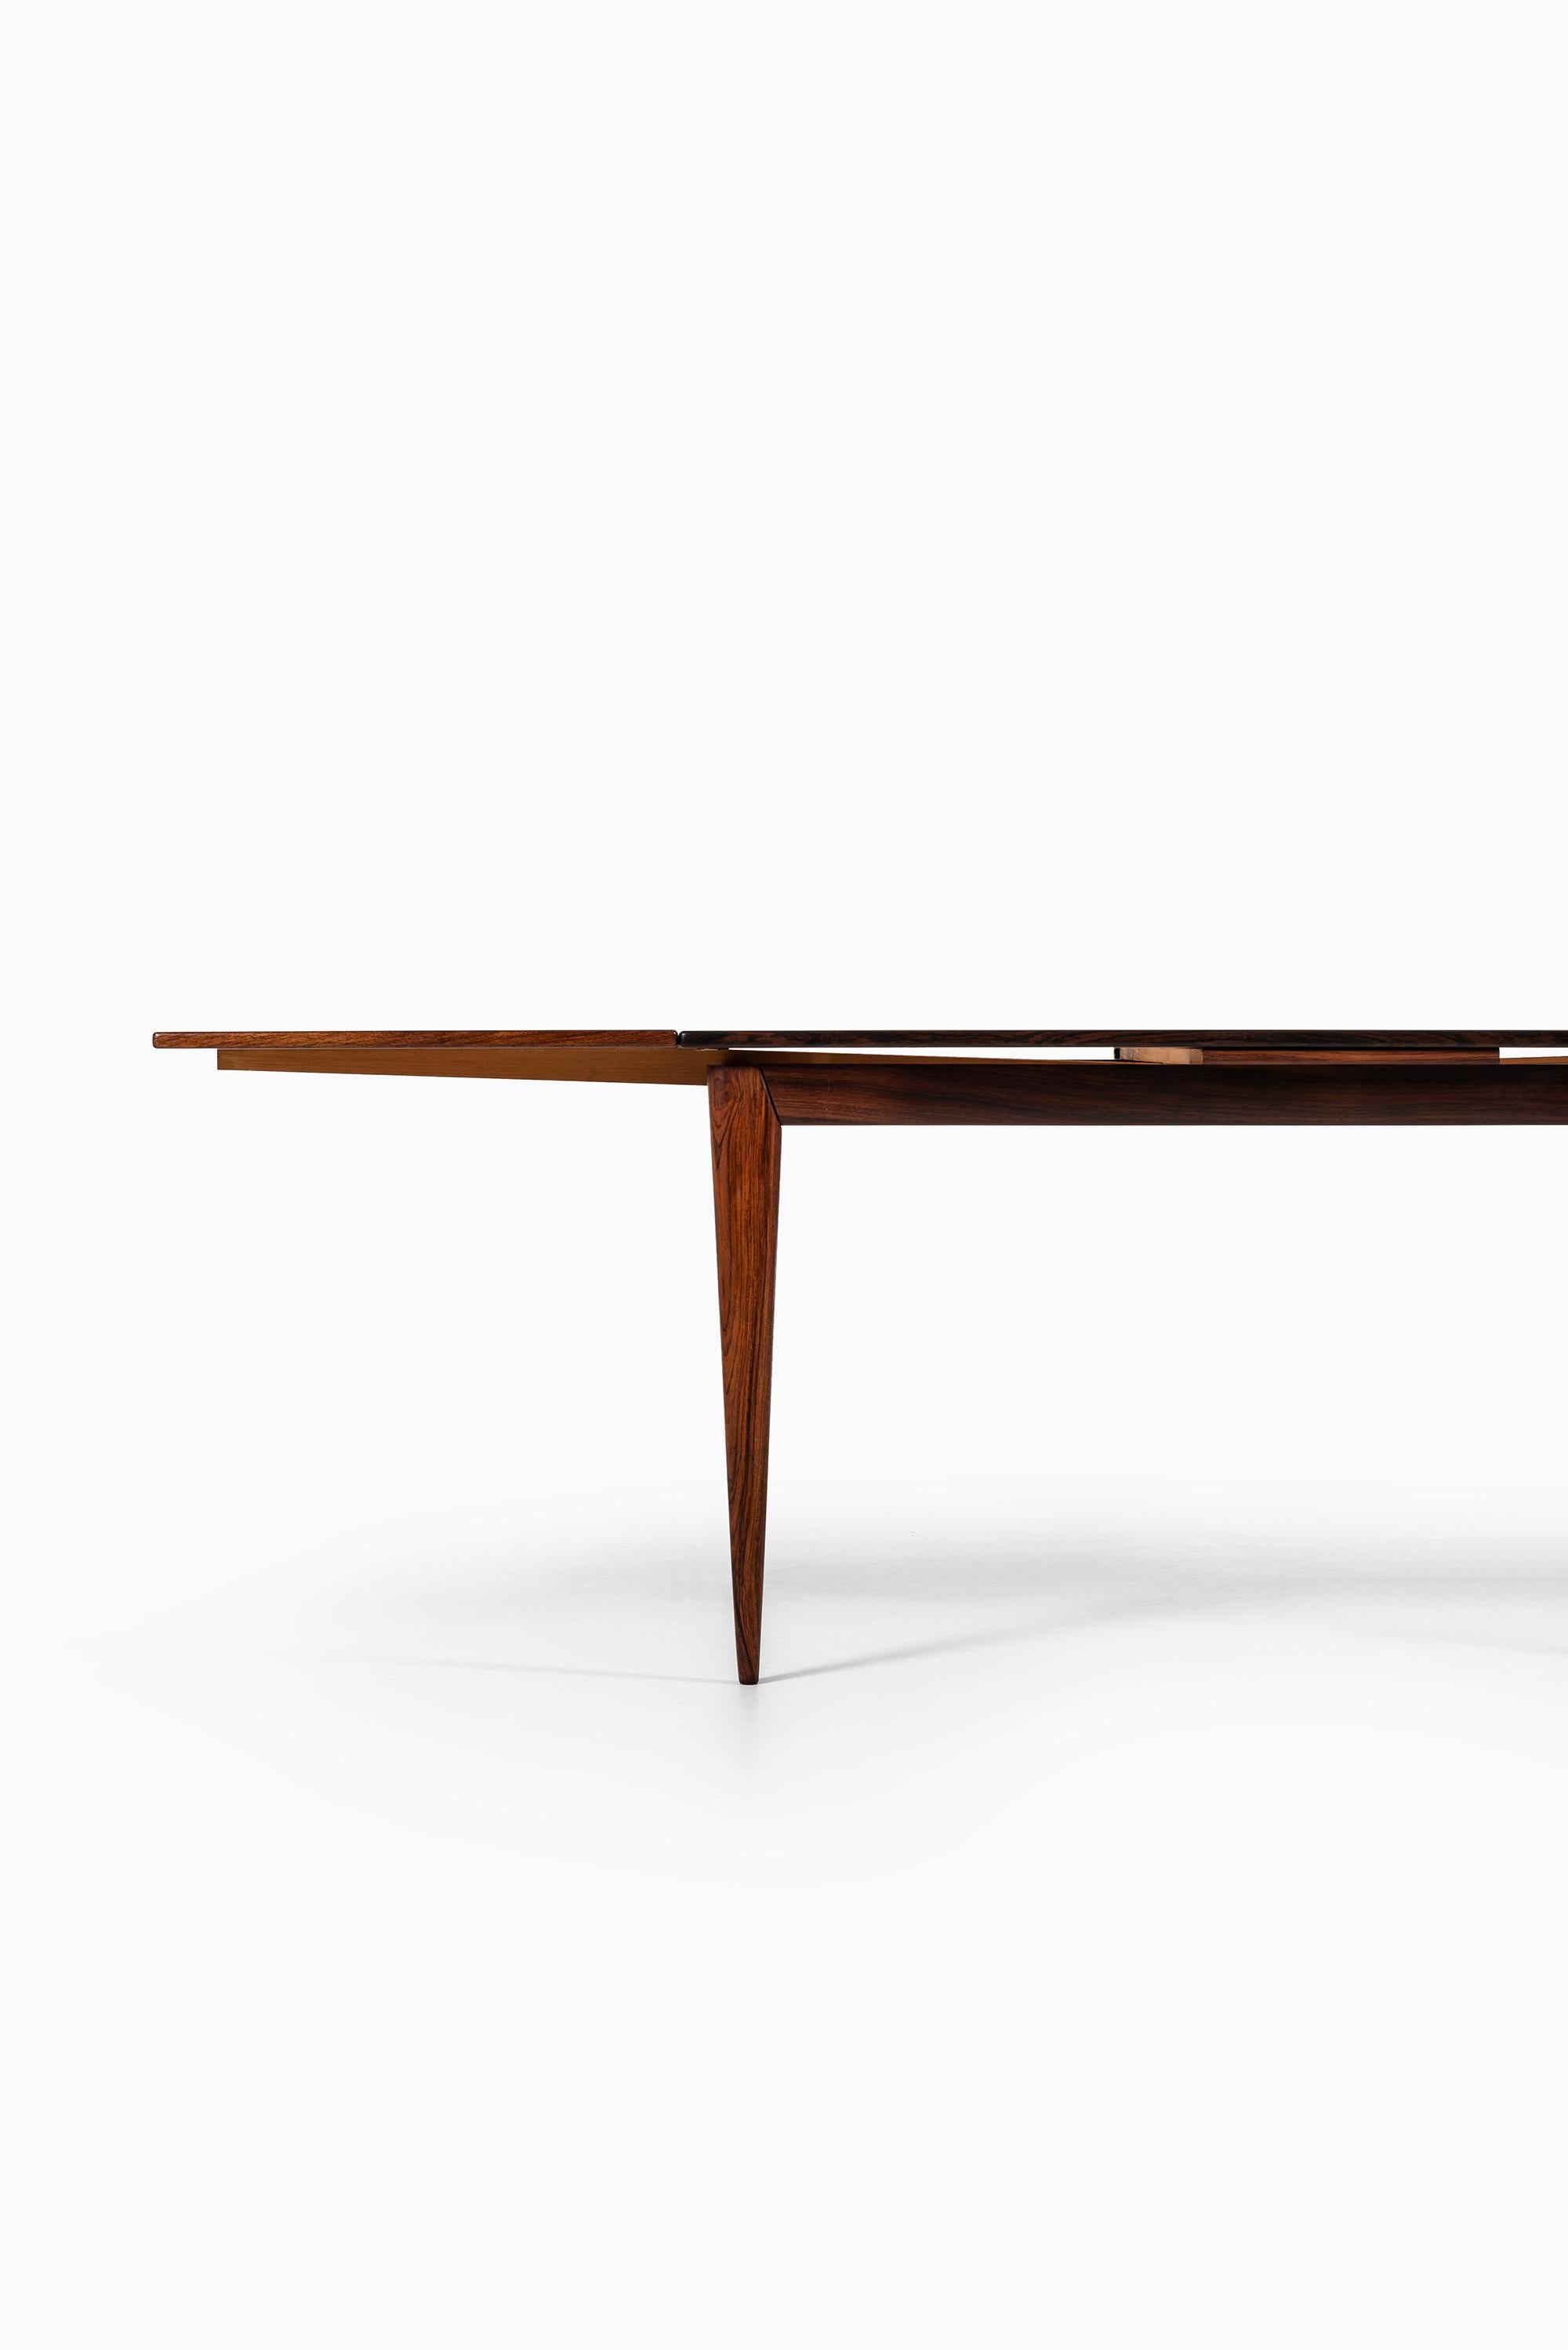 Niels O. Møller Dining Table Model 254 in Rosewood by J.L. Møllers Møbelfabrik In Excellent Condition For Sale In Limhamn, Skåne län